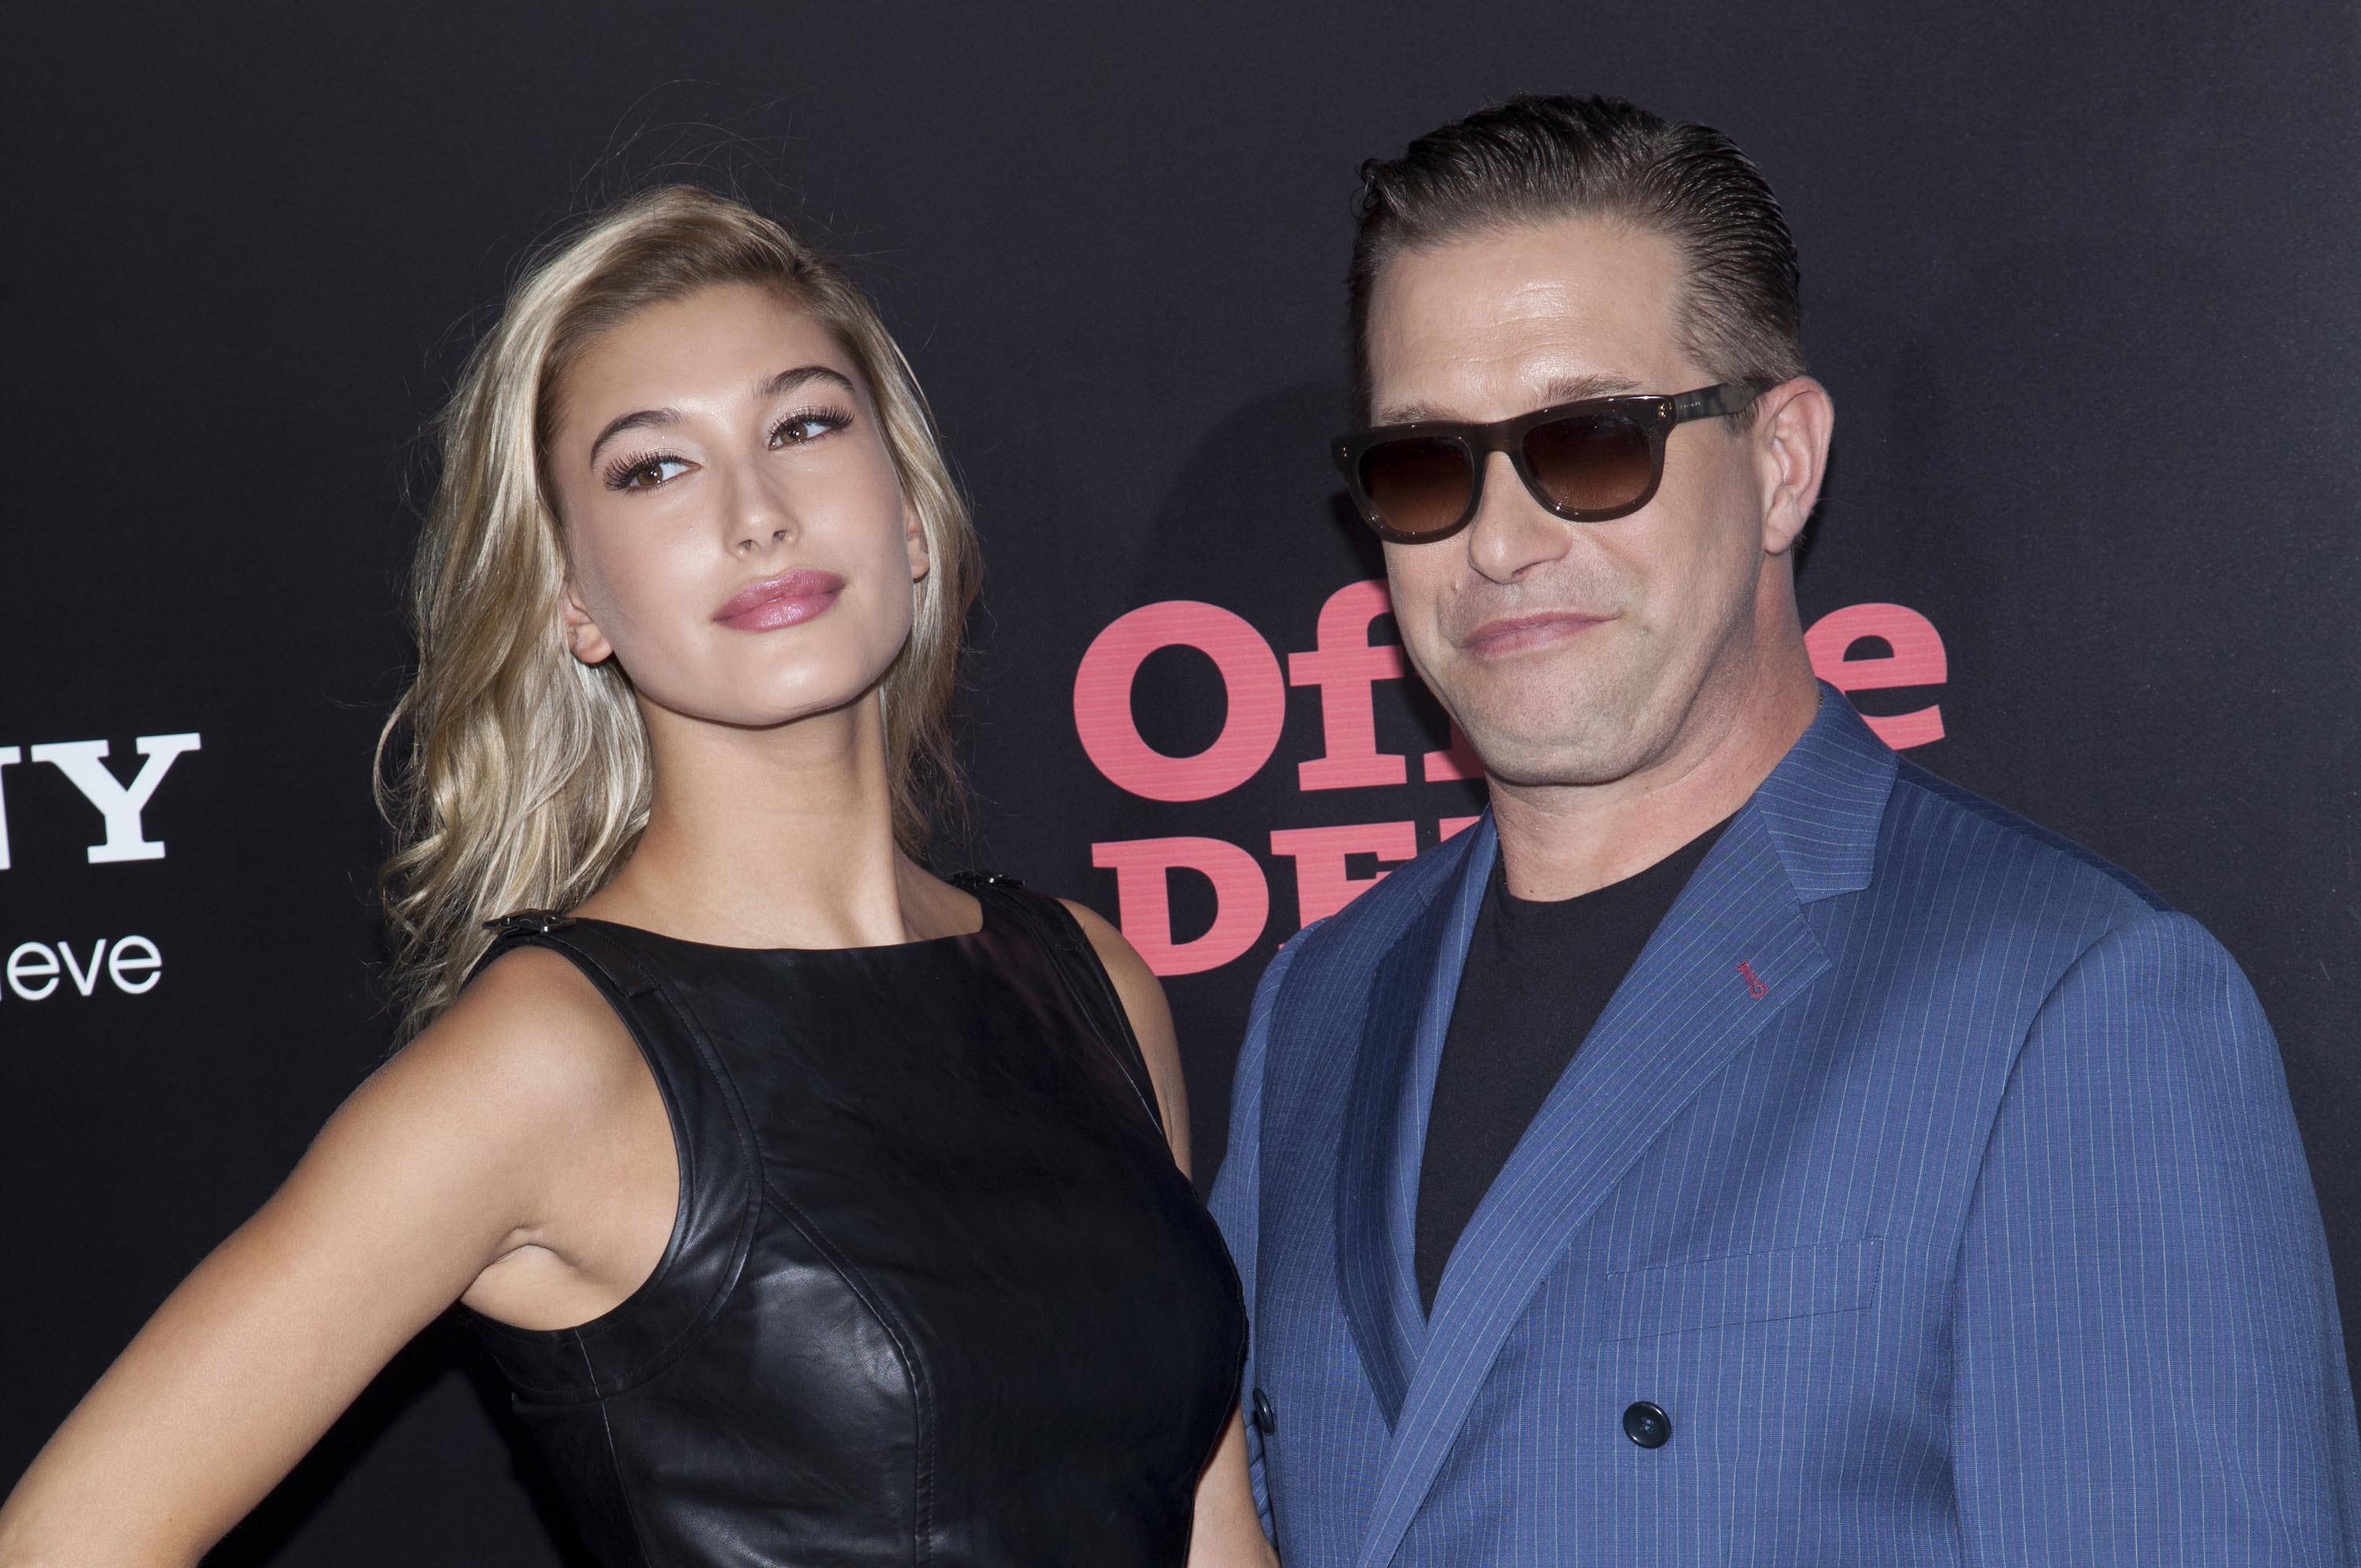 Hailey Baldwin attends the One Direction This Is Us world premiere